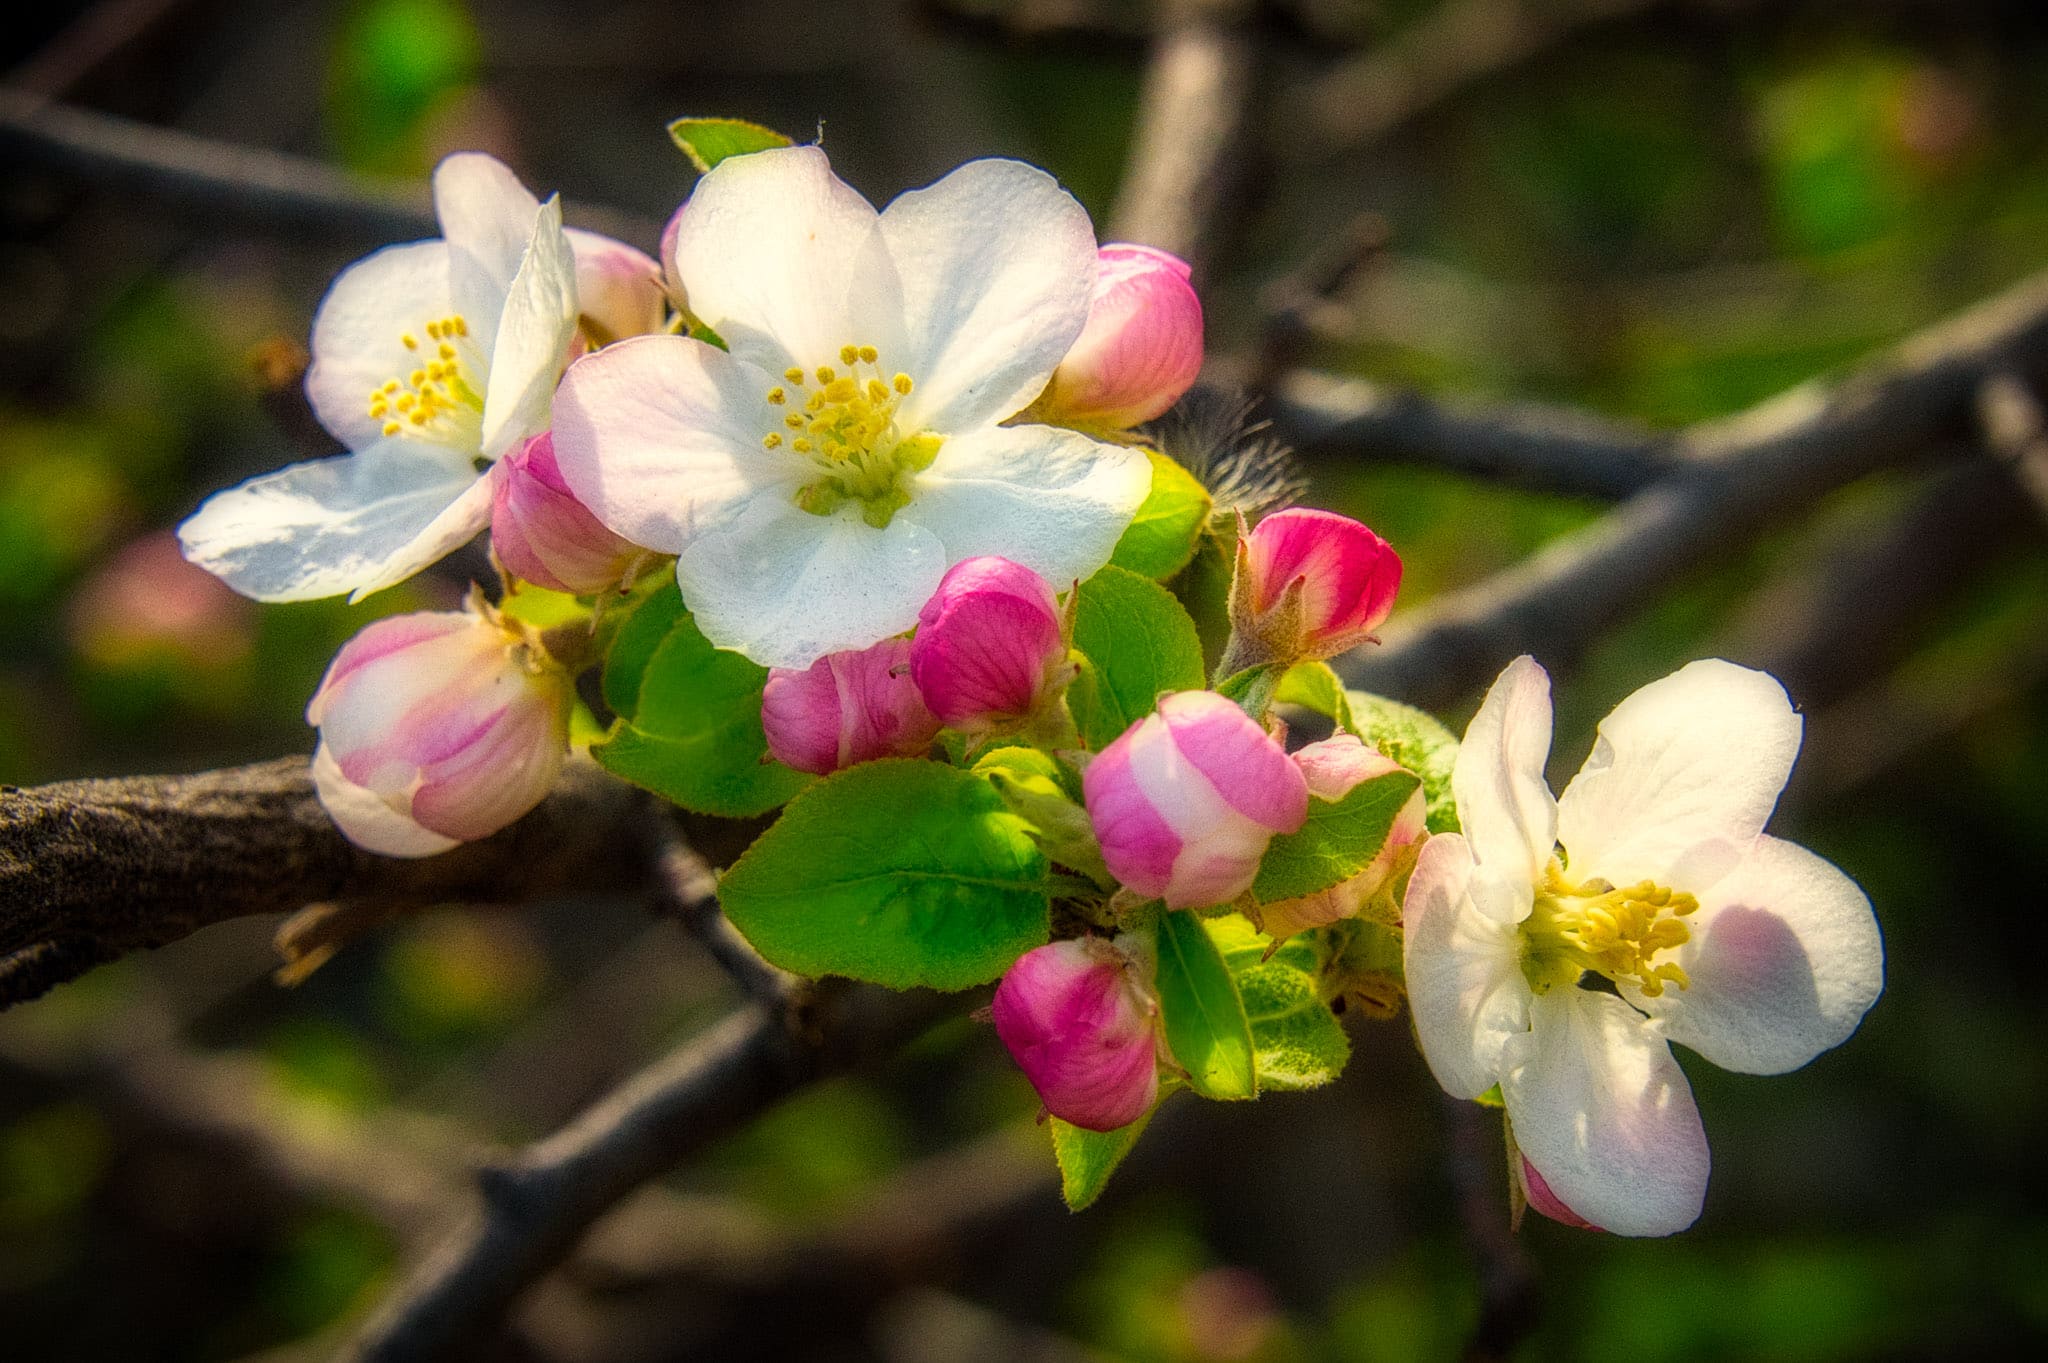 These apple blossoms are pretty in pink along a sidewalk in Boulder, Colorado.